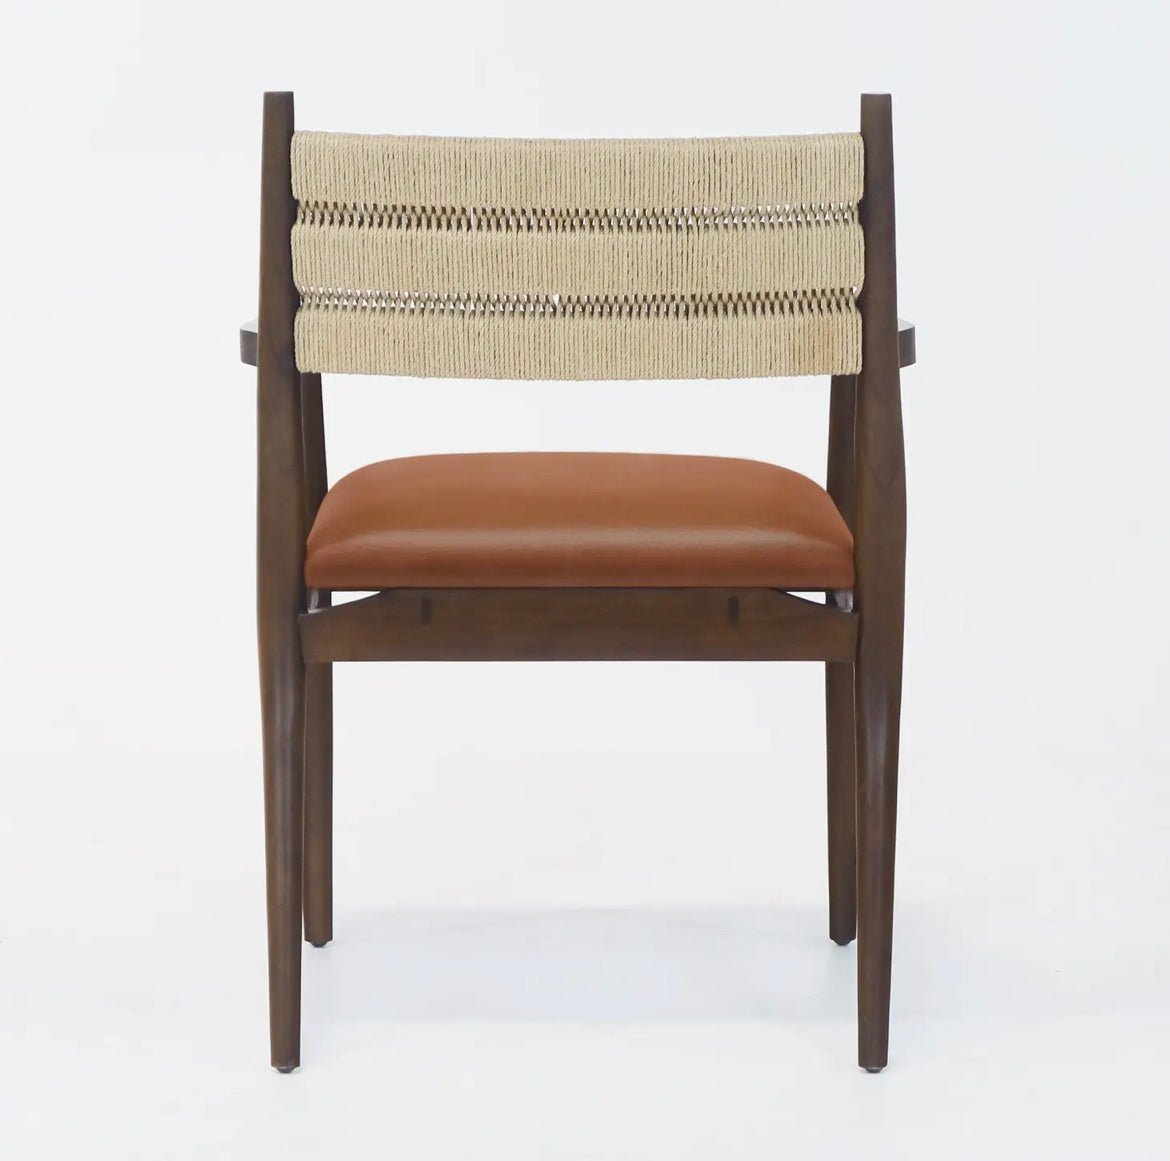 ‘Samsara’ Dining Chair w/Rope Backrest w/Tan Leather Seat - EcoLuxe Furnishings